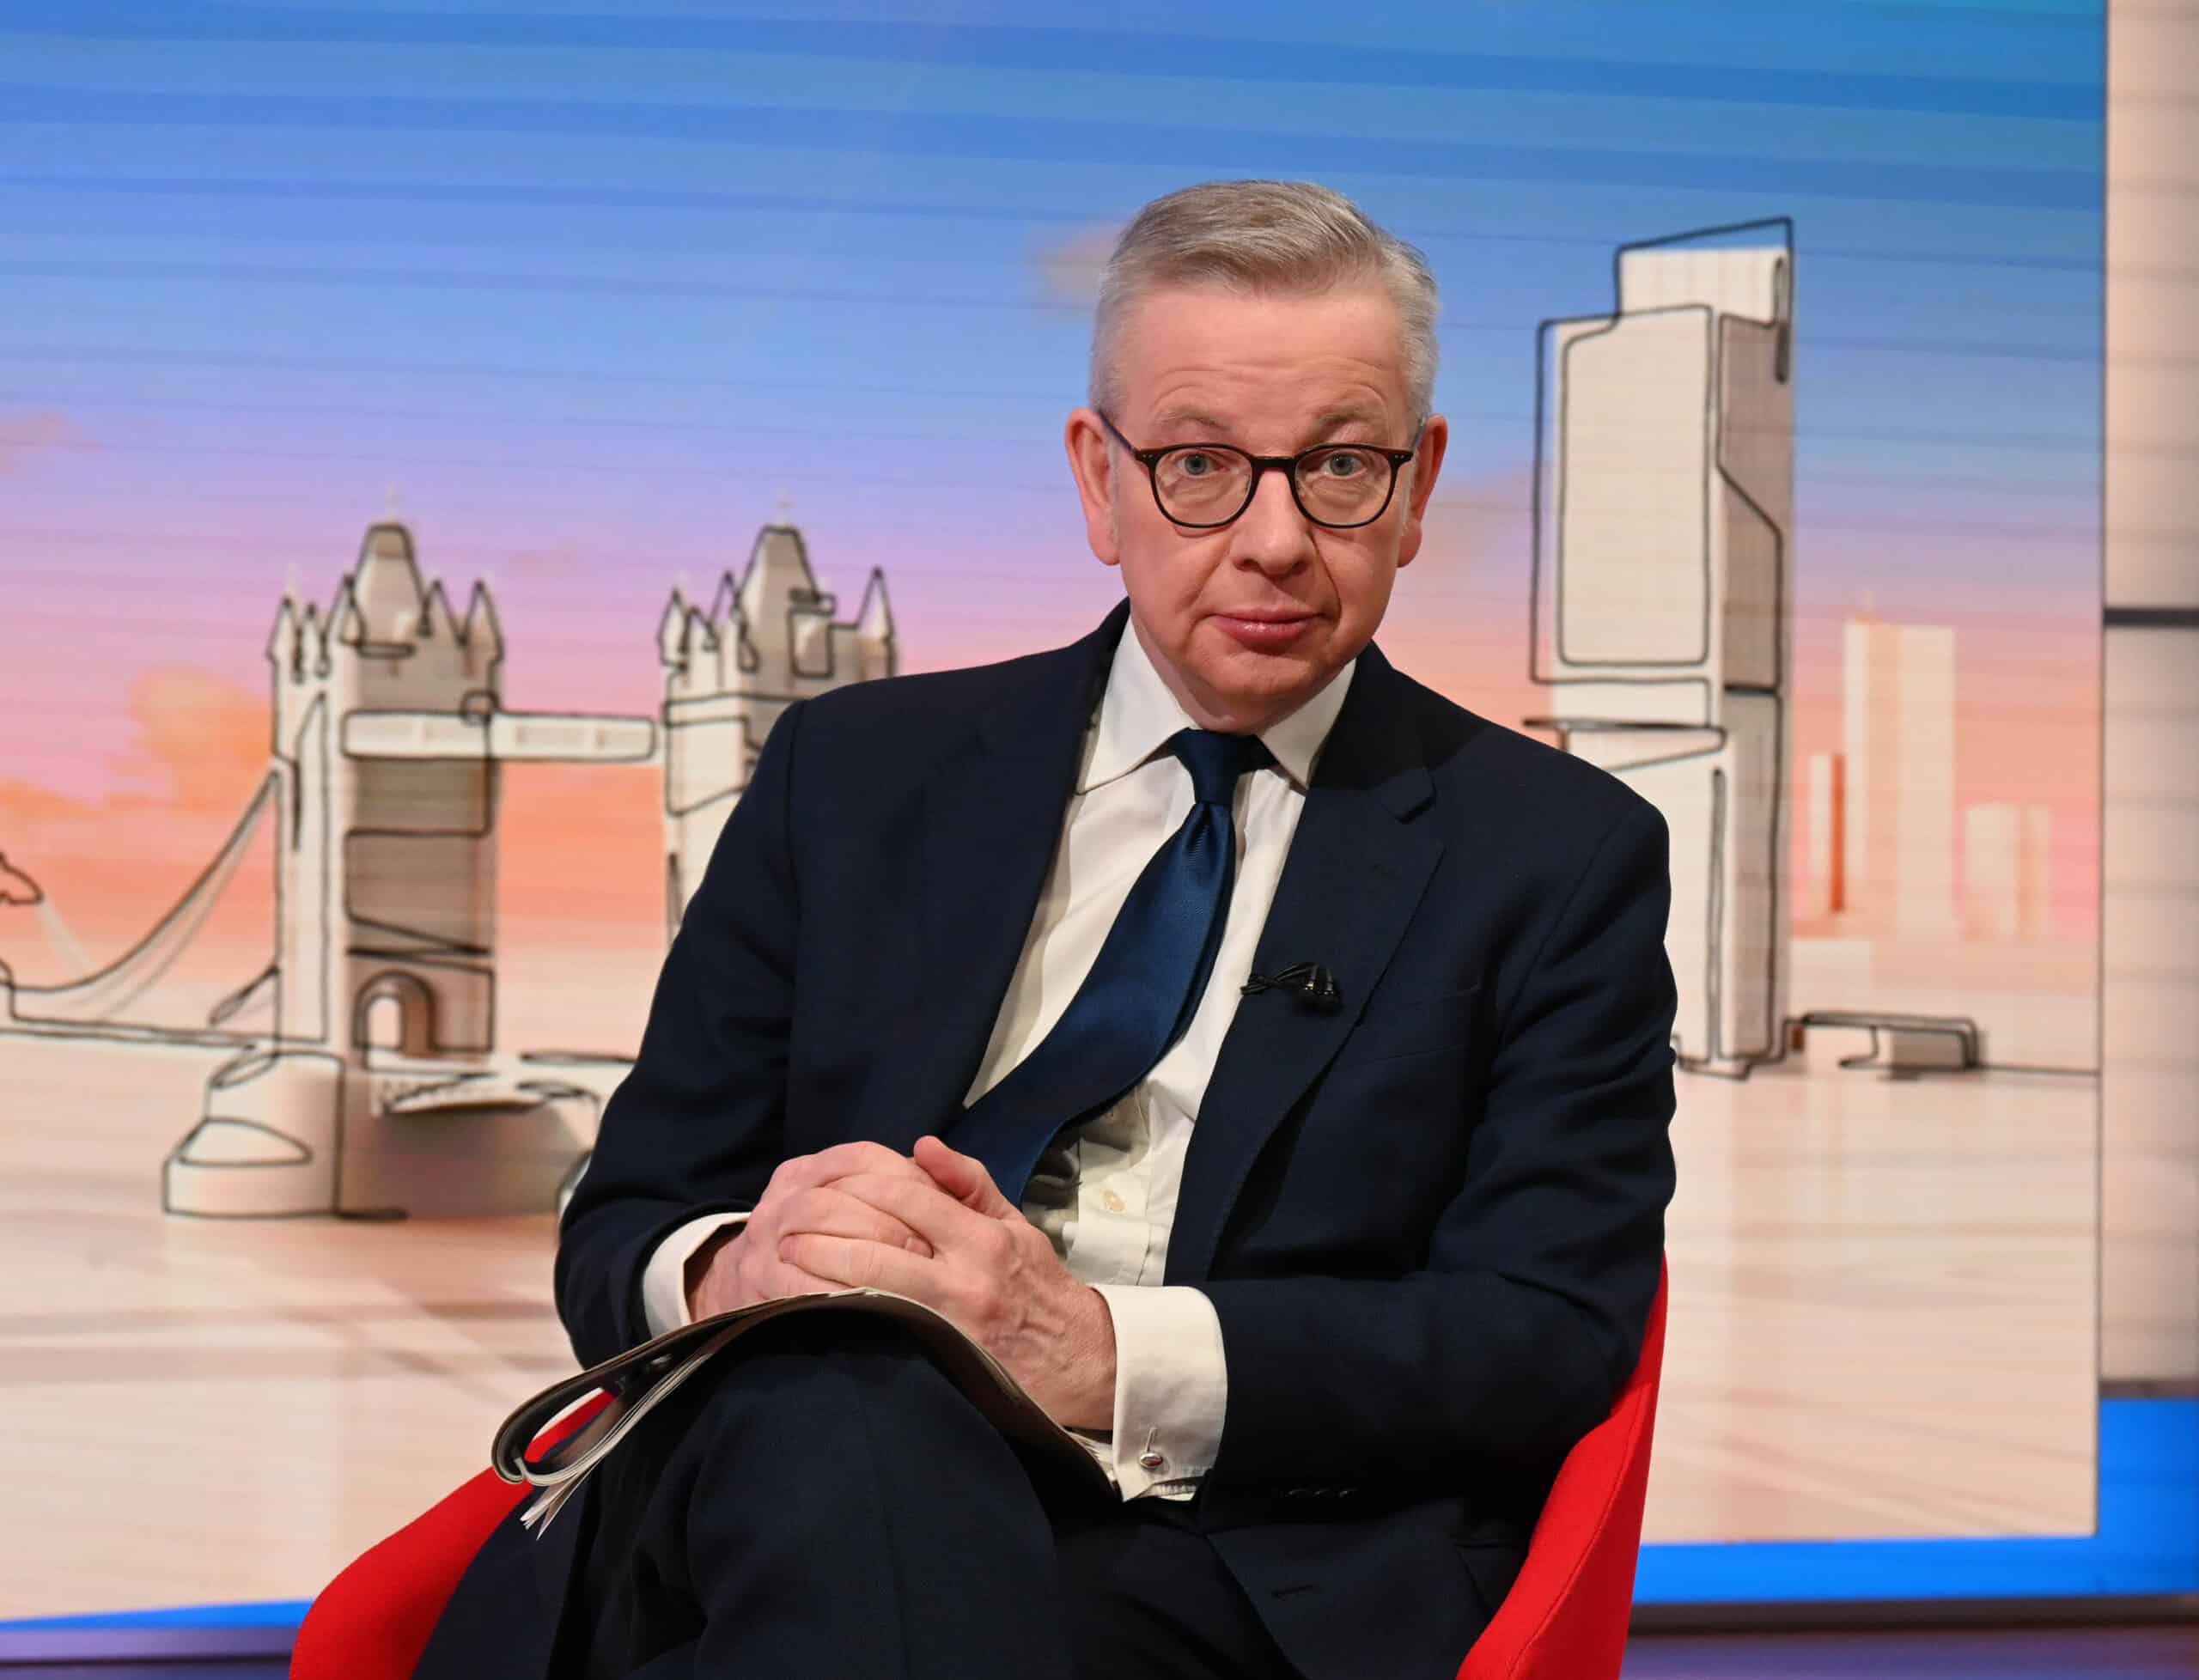 ‘You’ve done drugs!’: Gove promoting Govt’s ban on laughing gas is comical